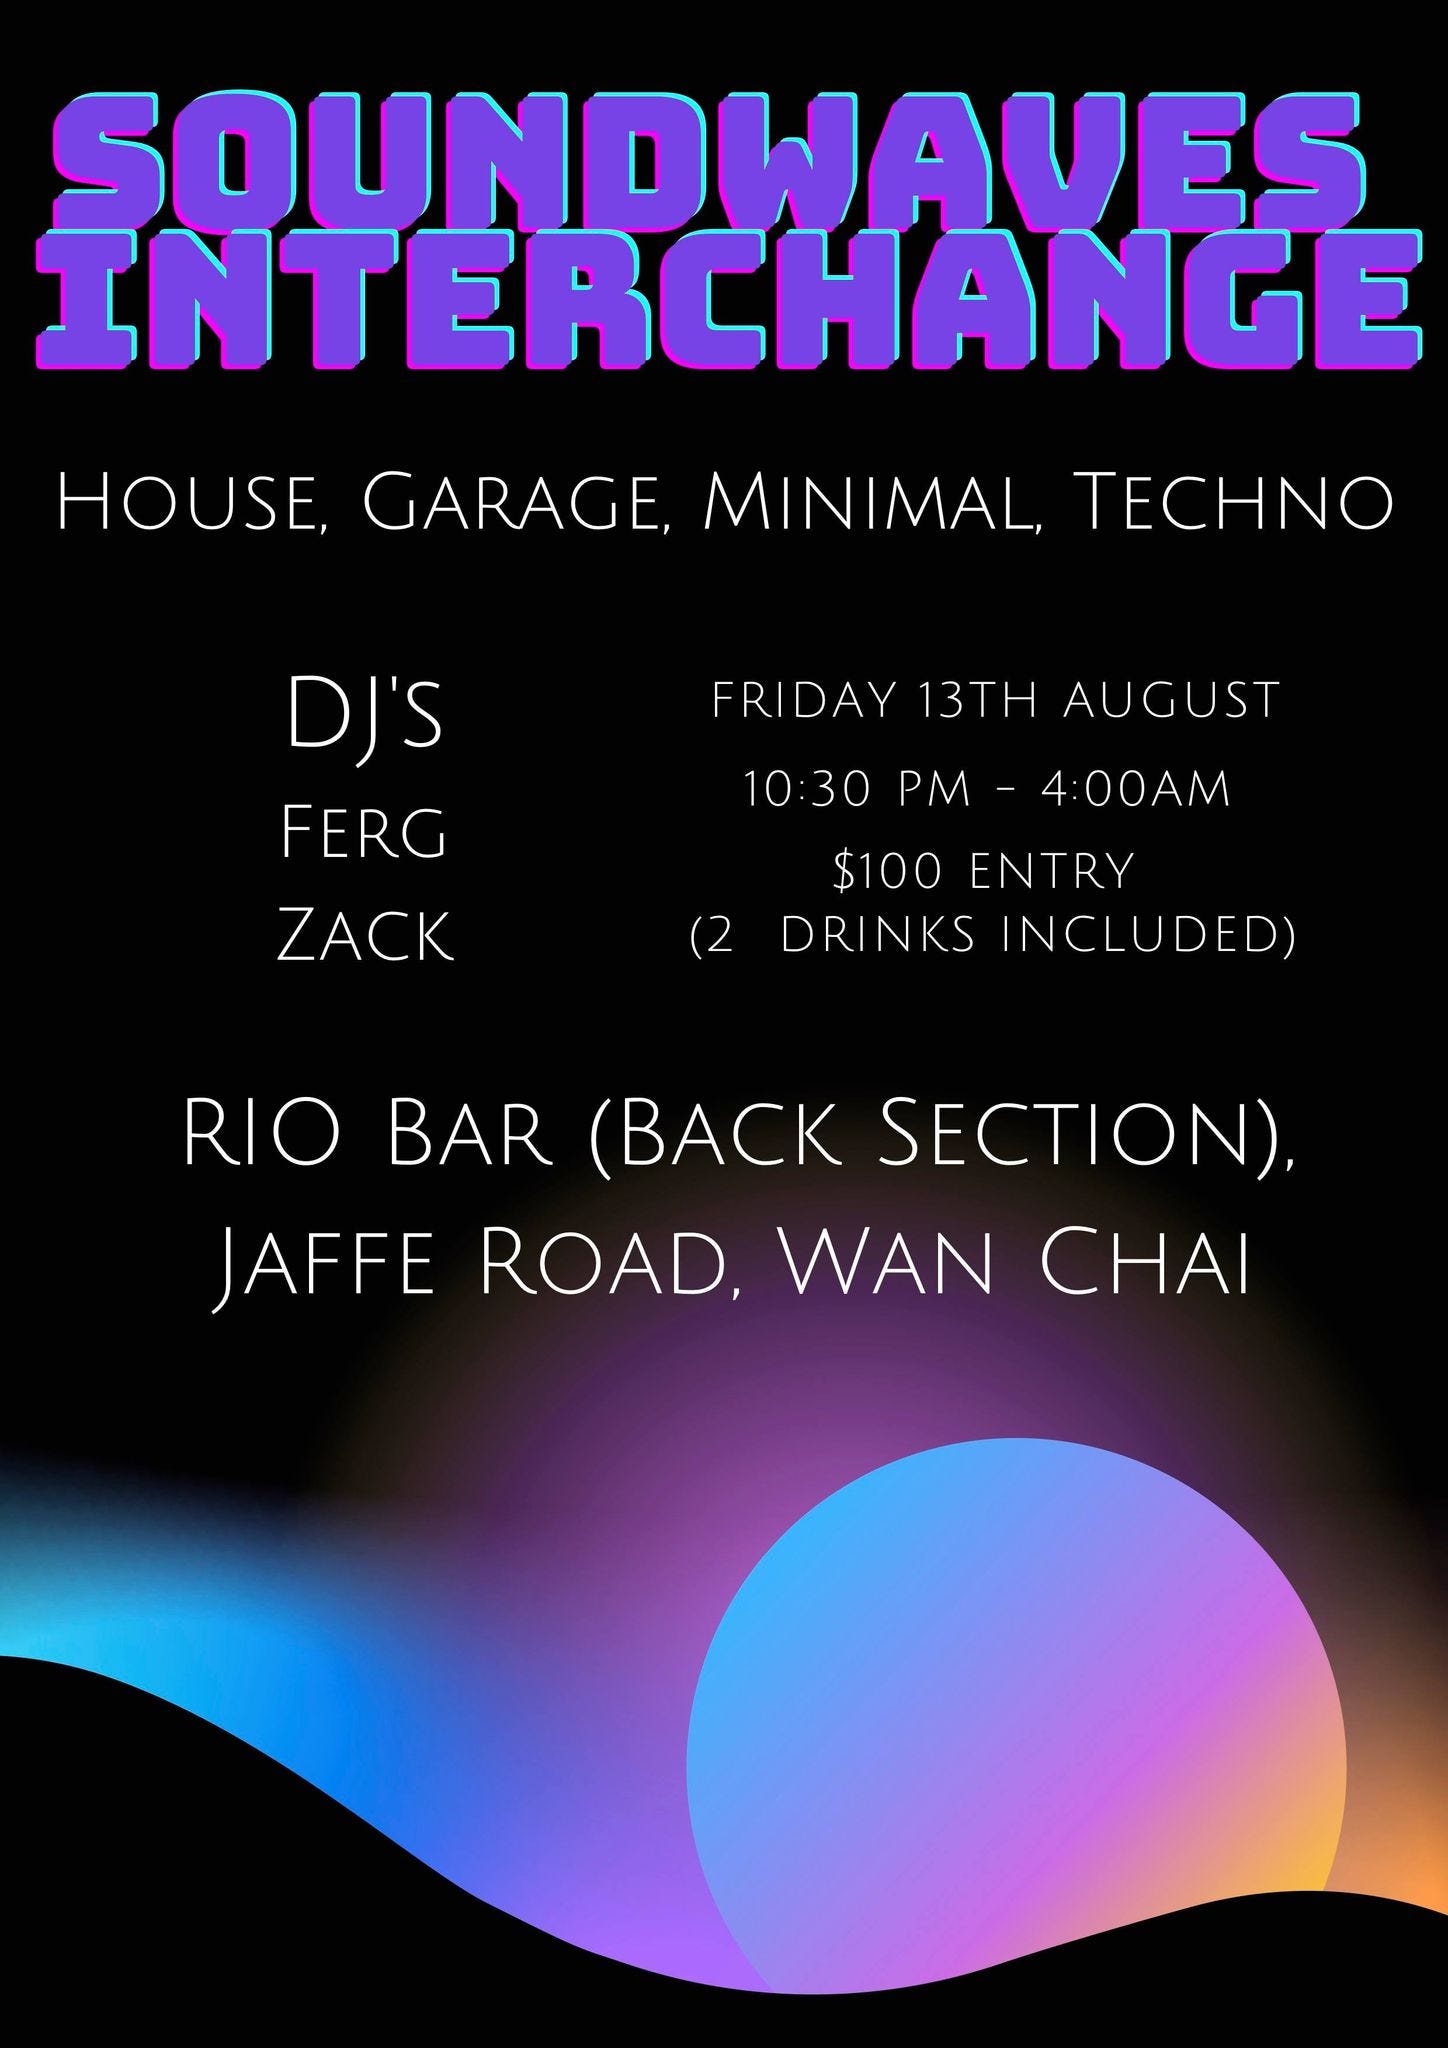 May be an image of text that says "SOUNDWAVES INTERCHANGE HOUSE, GARAGE, MINIMAL, TECHNO FRIDAY 13TH AUGUST DJ'S FERG ZACK 10:30 PM- PM 4:00AM $100 ENTRY DRINKS INCI UDED) (2 RIO BAR (BACK SECTION), JAFFE ROAD, WAN CHAI"